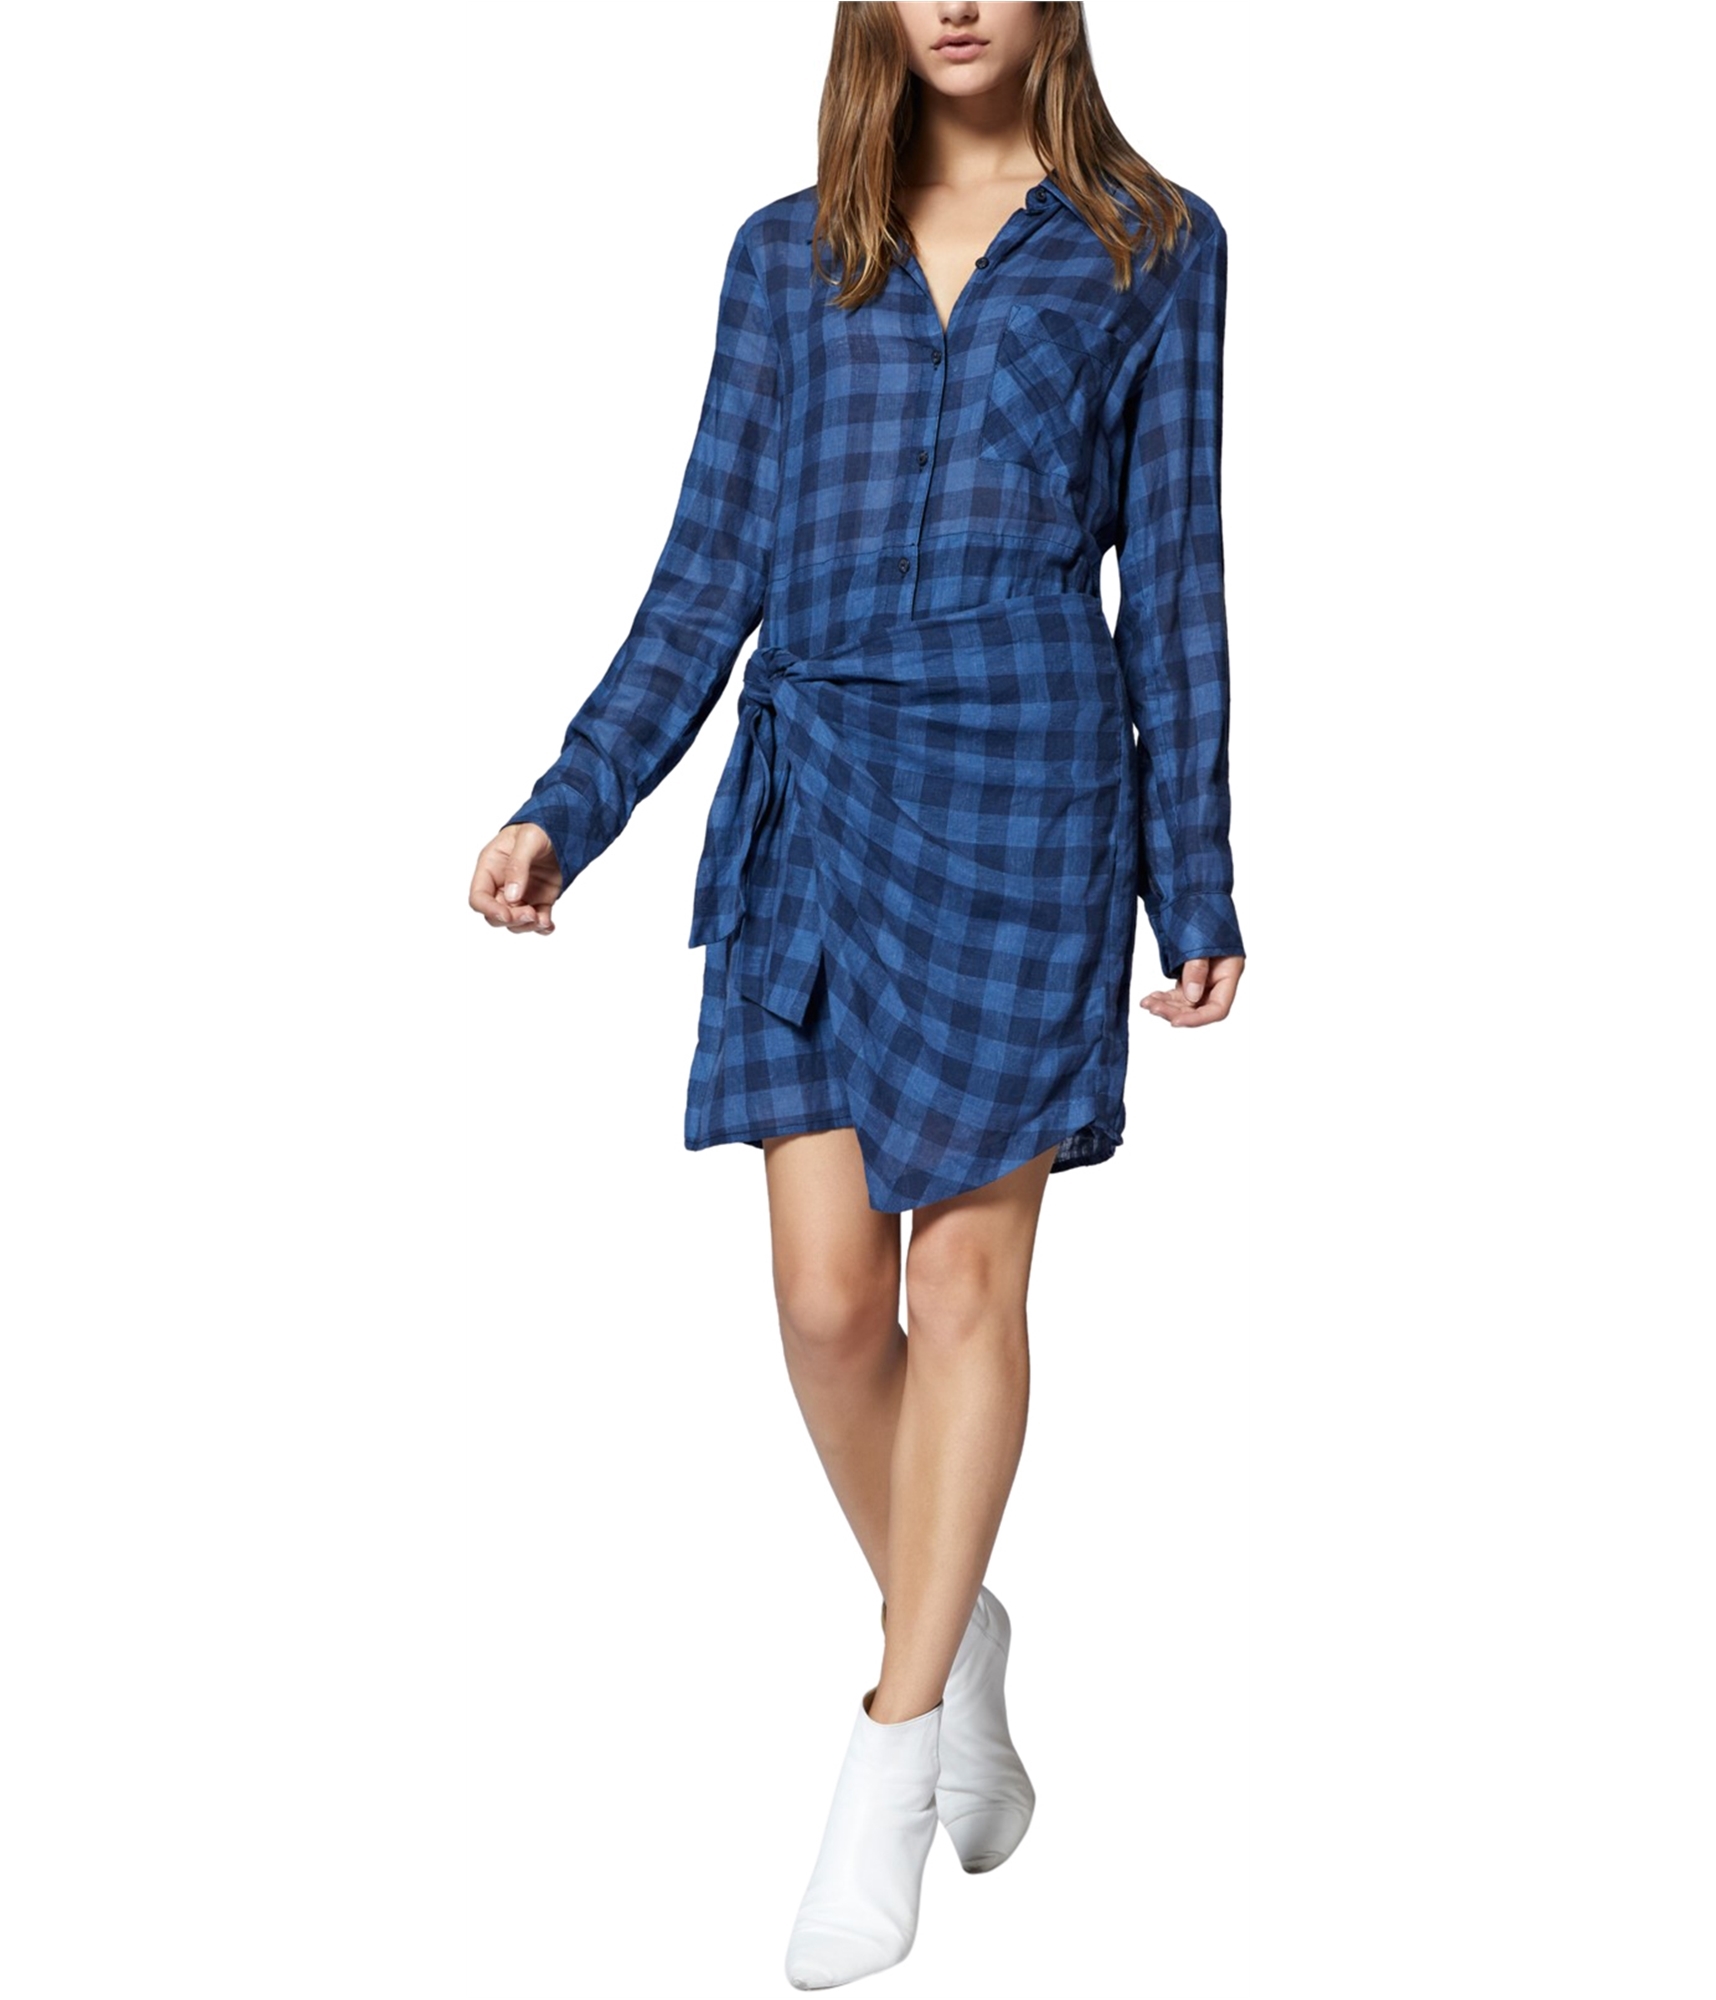 Buy a Sanctuary Clothing Womens Side Tie Wrap Dress | Tagsweekly